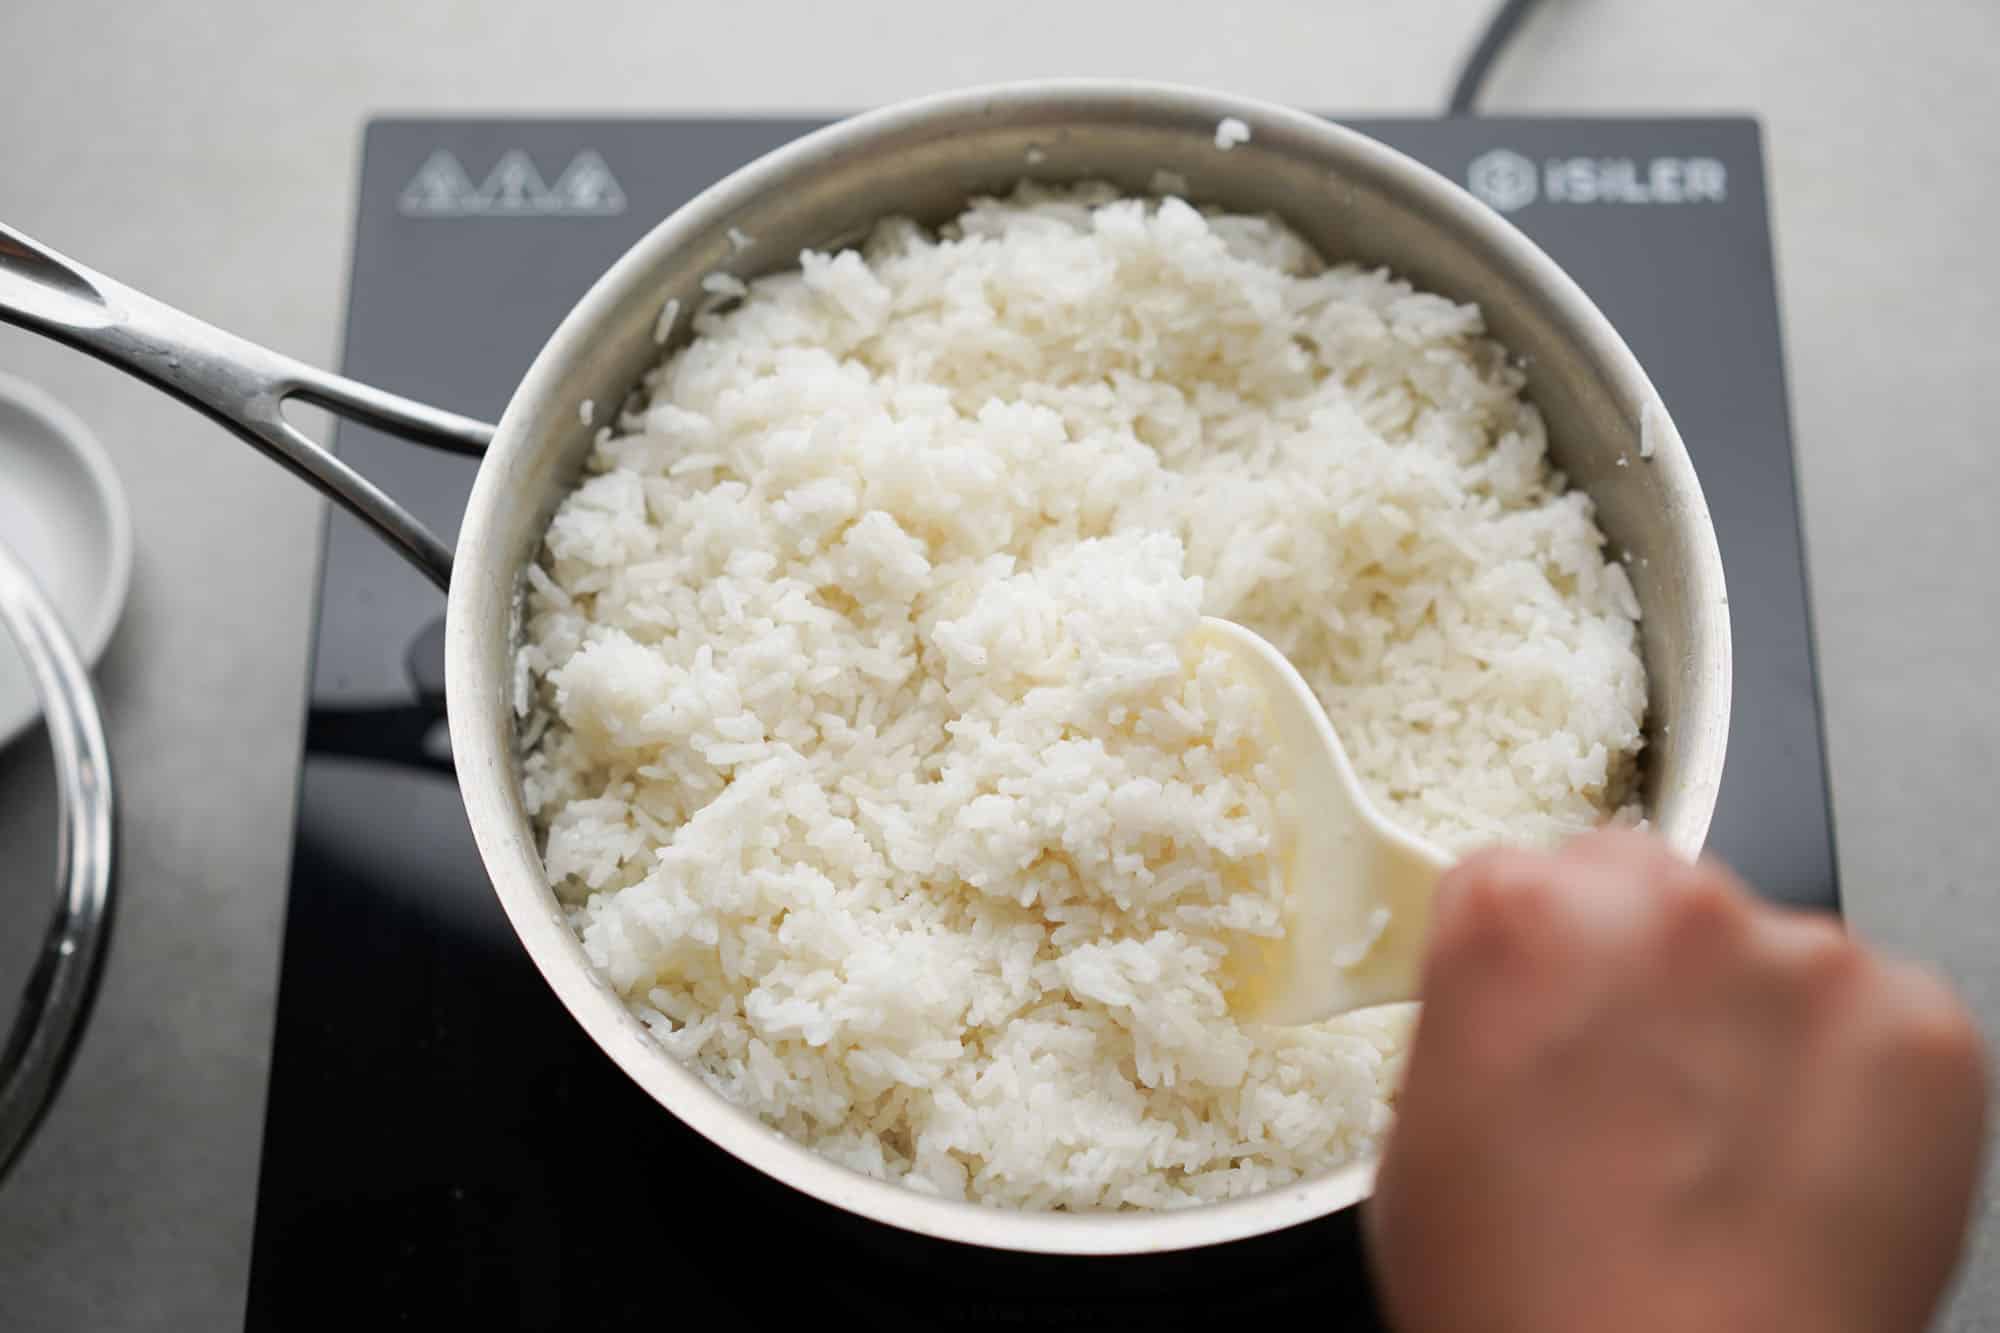 https://www.hungryhuy.com/wp-content/uploads/fluffing-coconut-rice.jpg